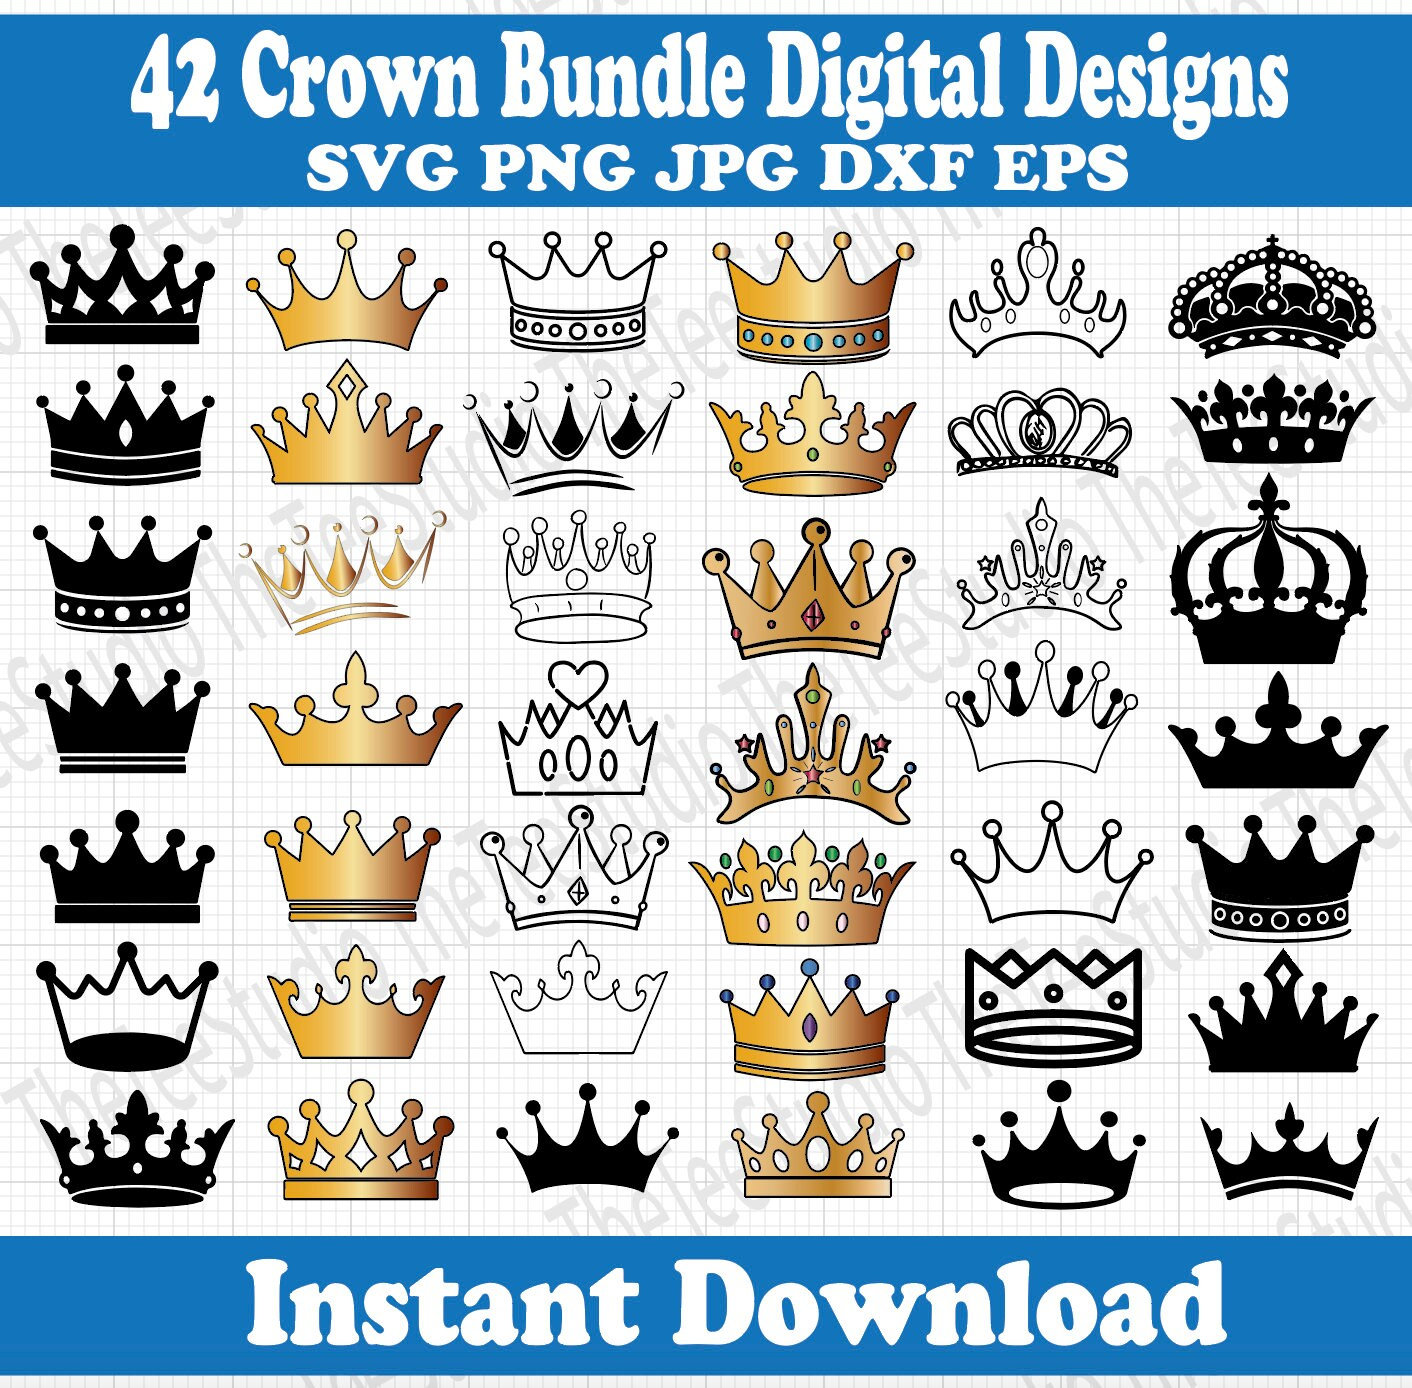 Paper Crown Template Graphic by SvgOcean · Creative Fabrica